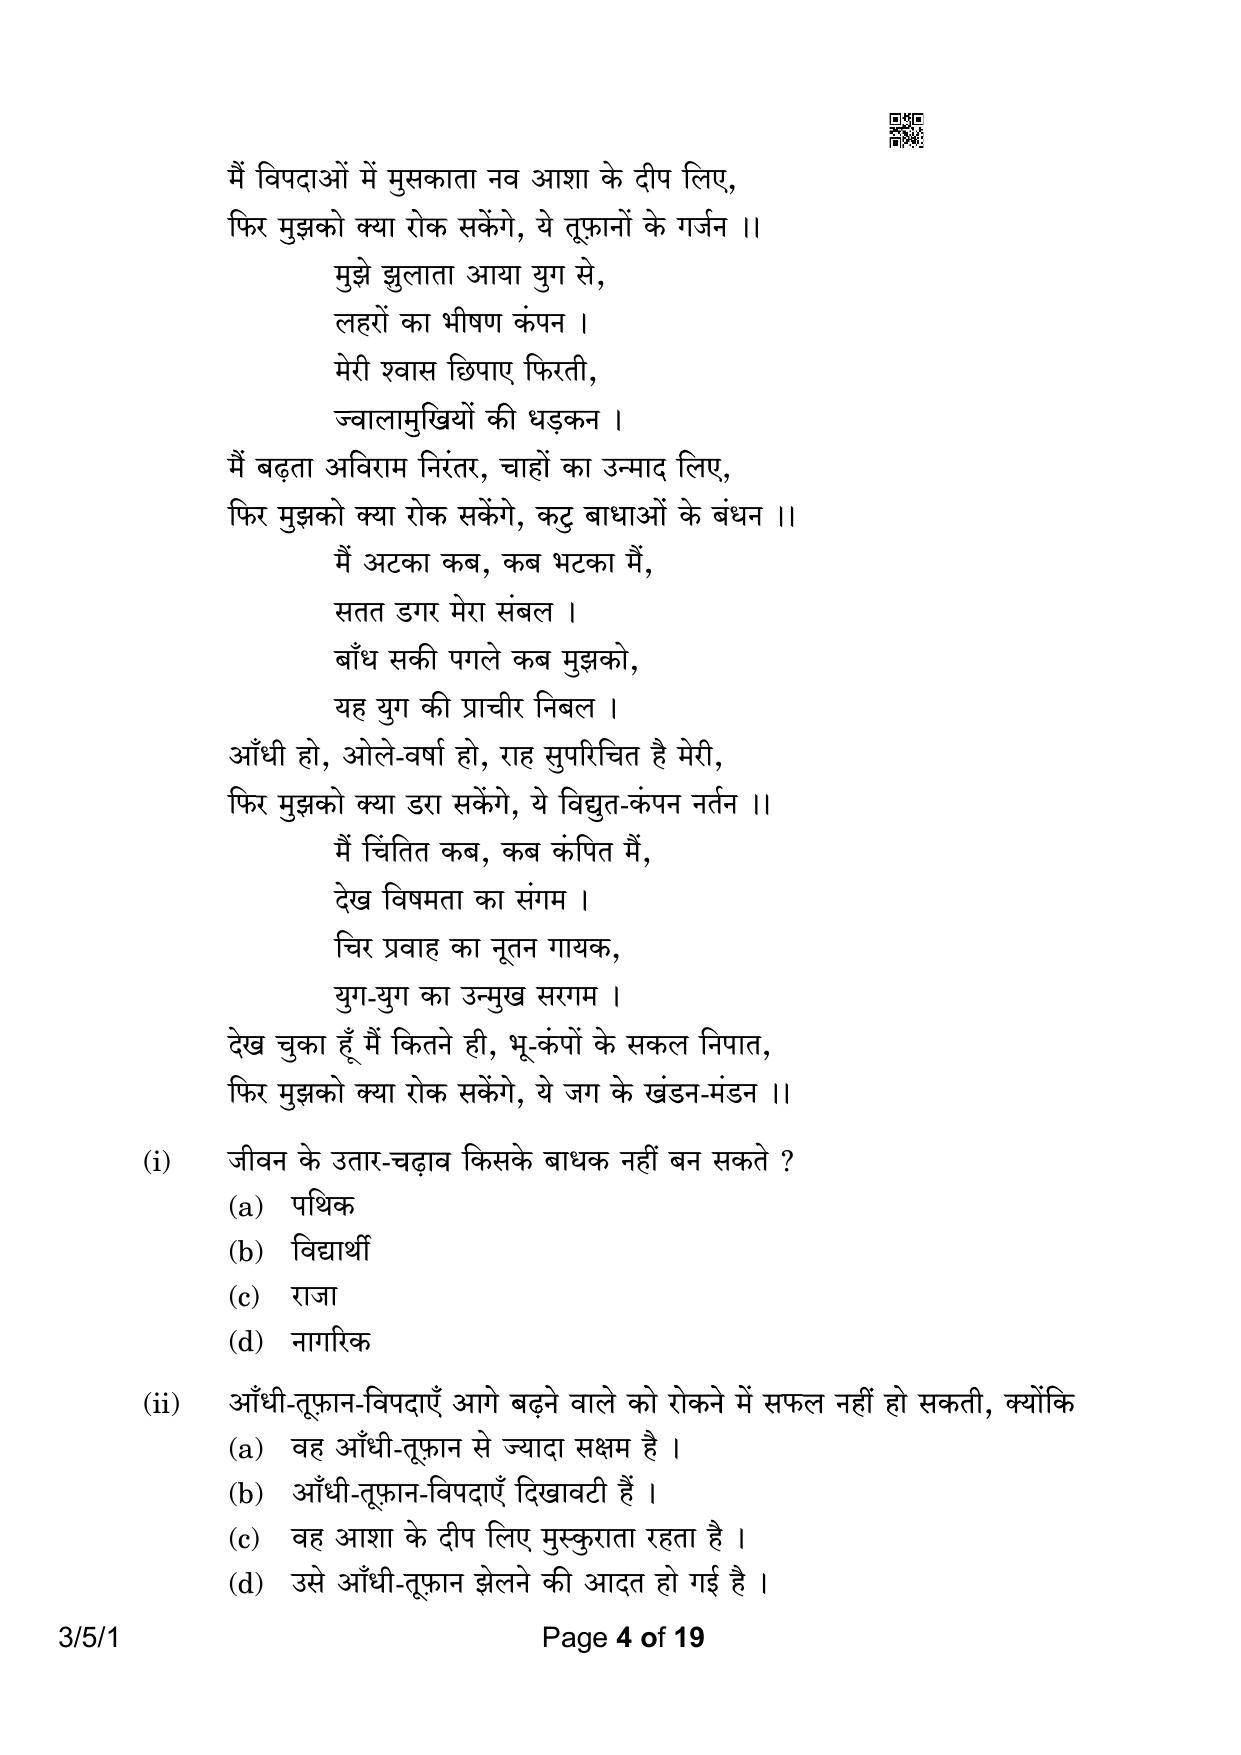 CBSE Class 10 3-5-1 Hindi A 2023 Question Paper - Page 4